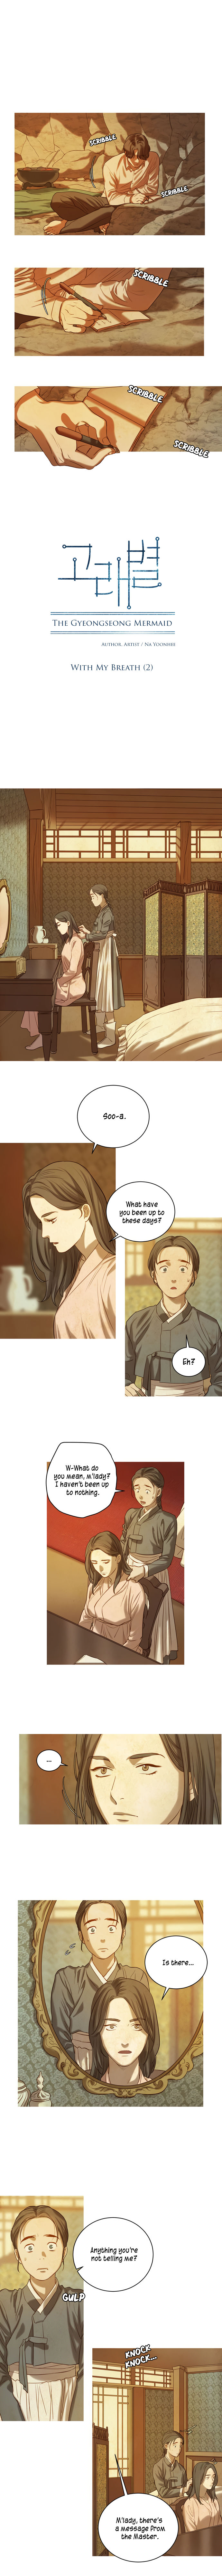 Gorae Byul – The Gyeongseong Mermaid Chapter 4 - Page 2